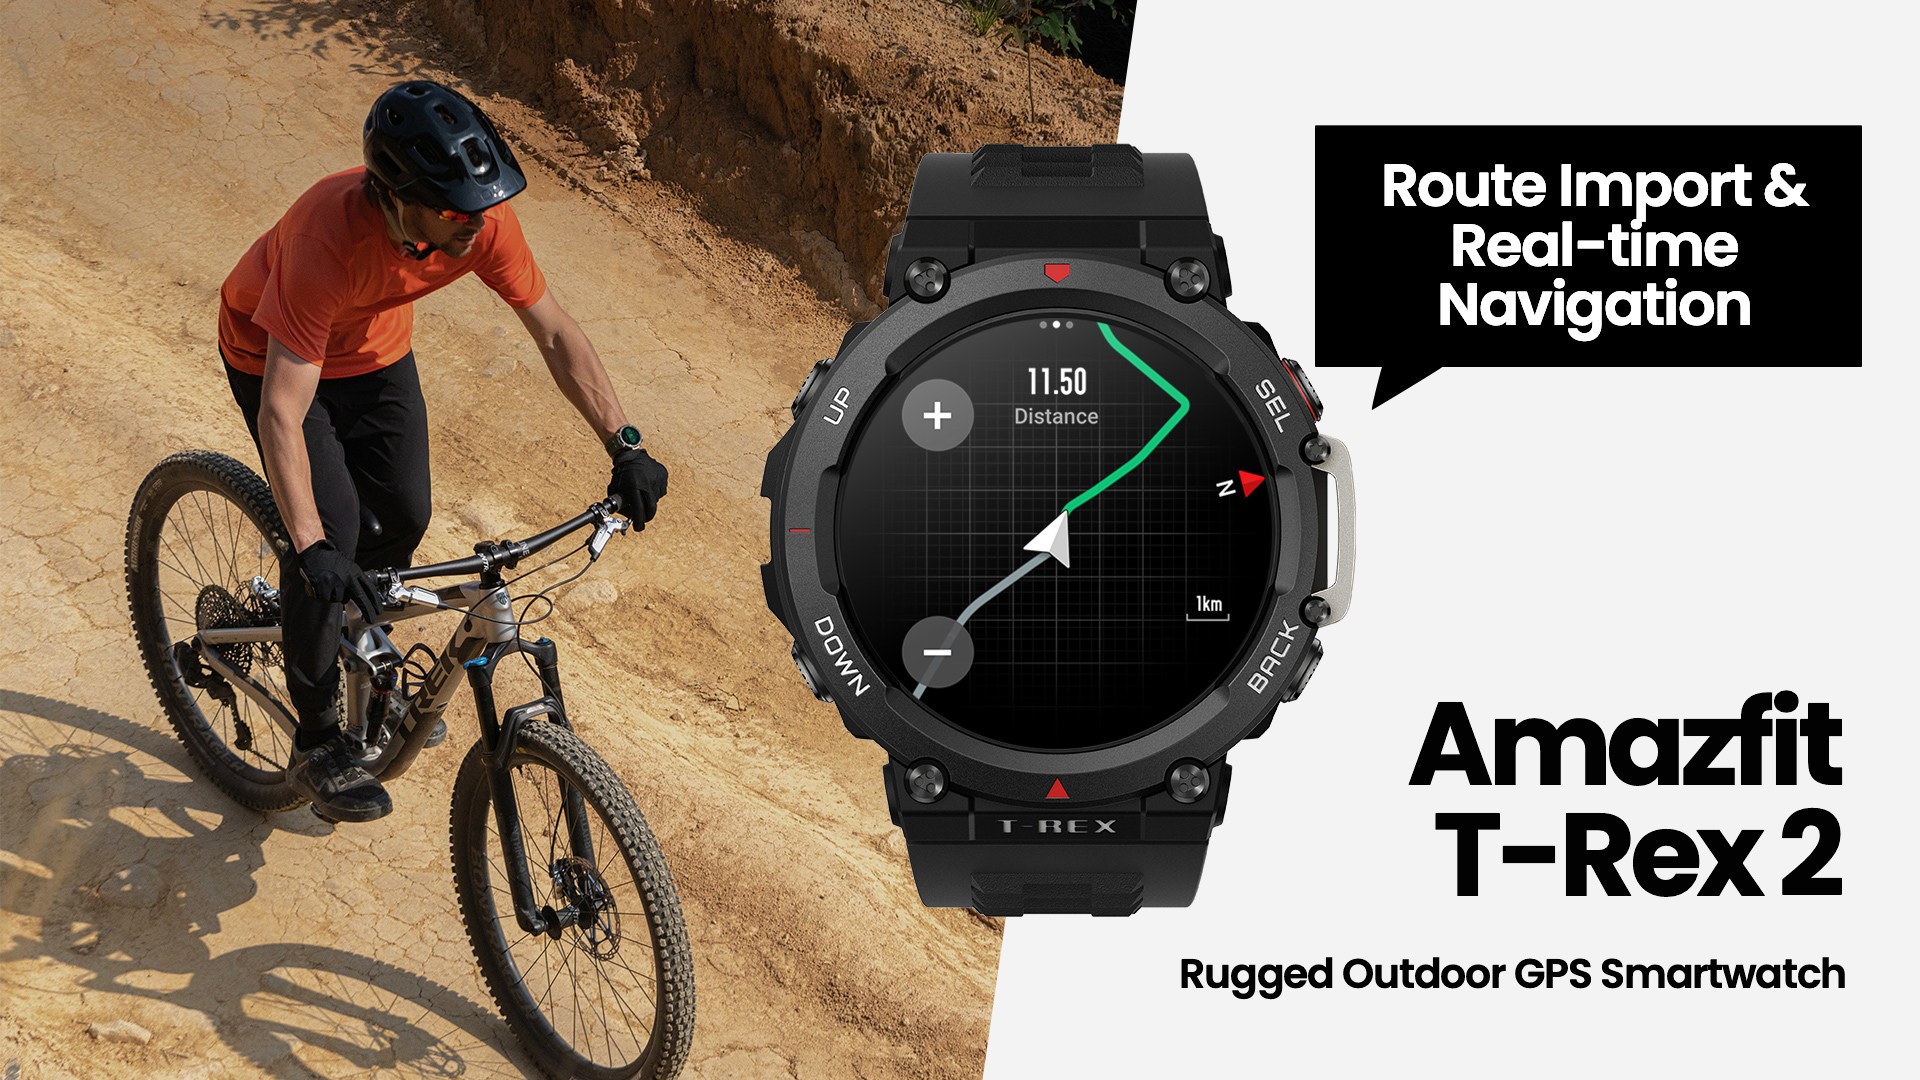 Amazfit TRex 2 review: a rugged adventure watch, at an excellent price